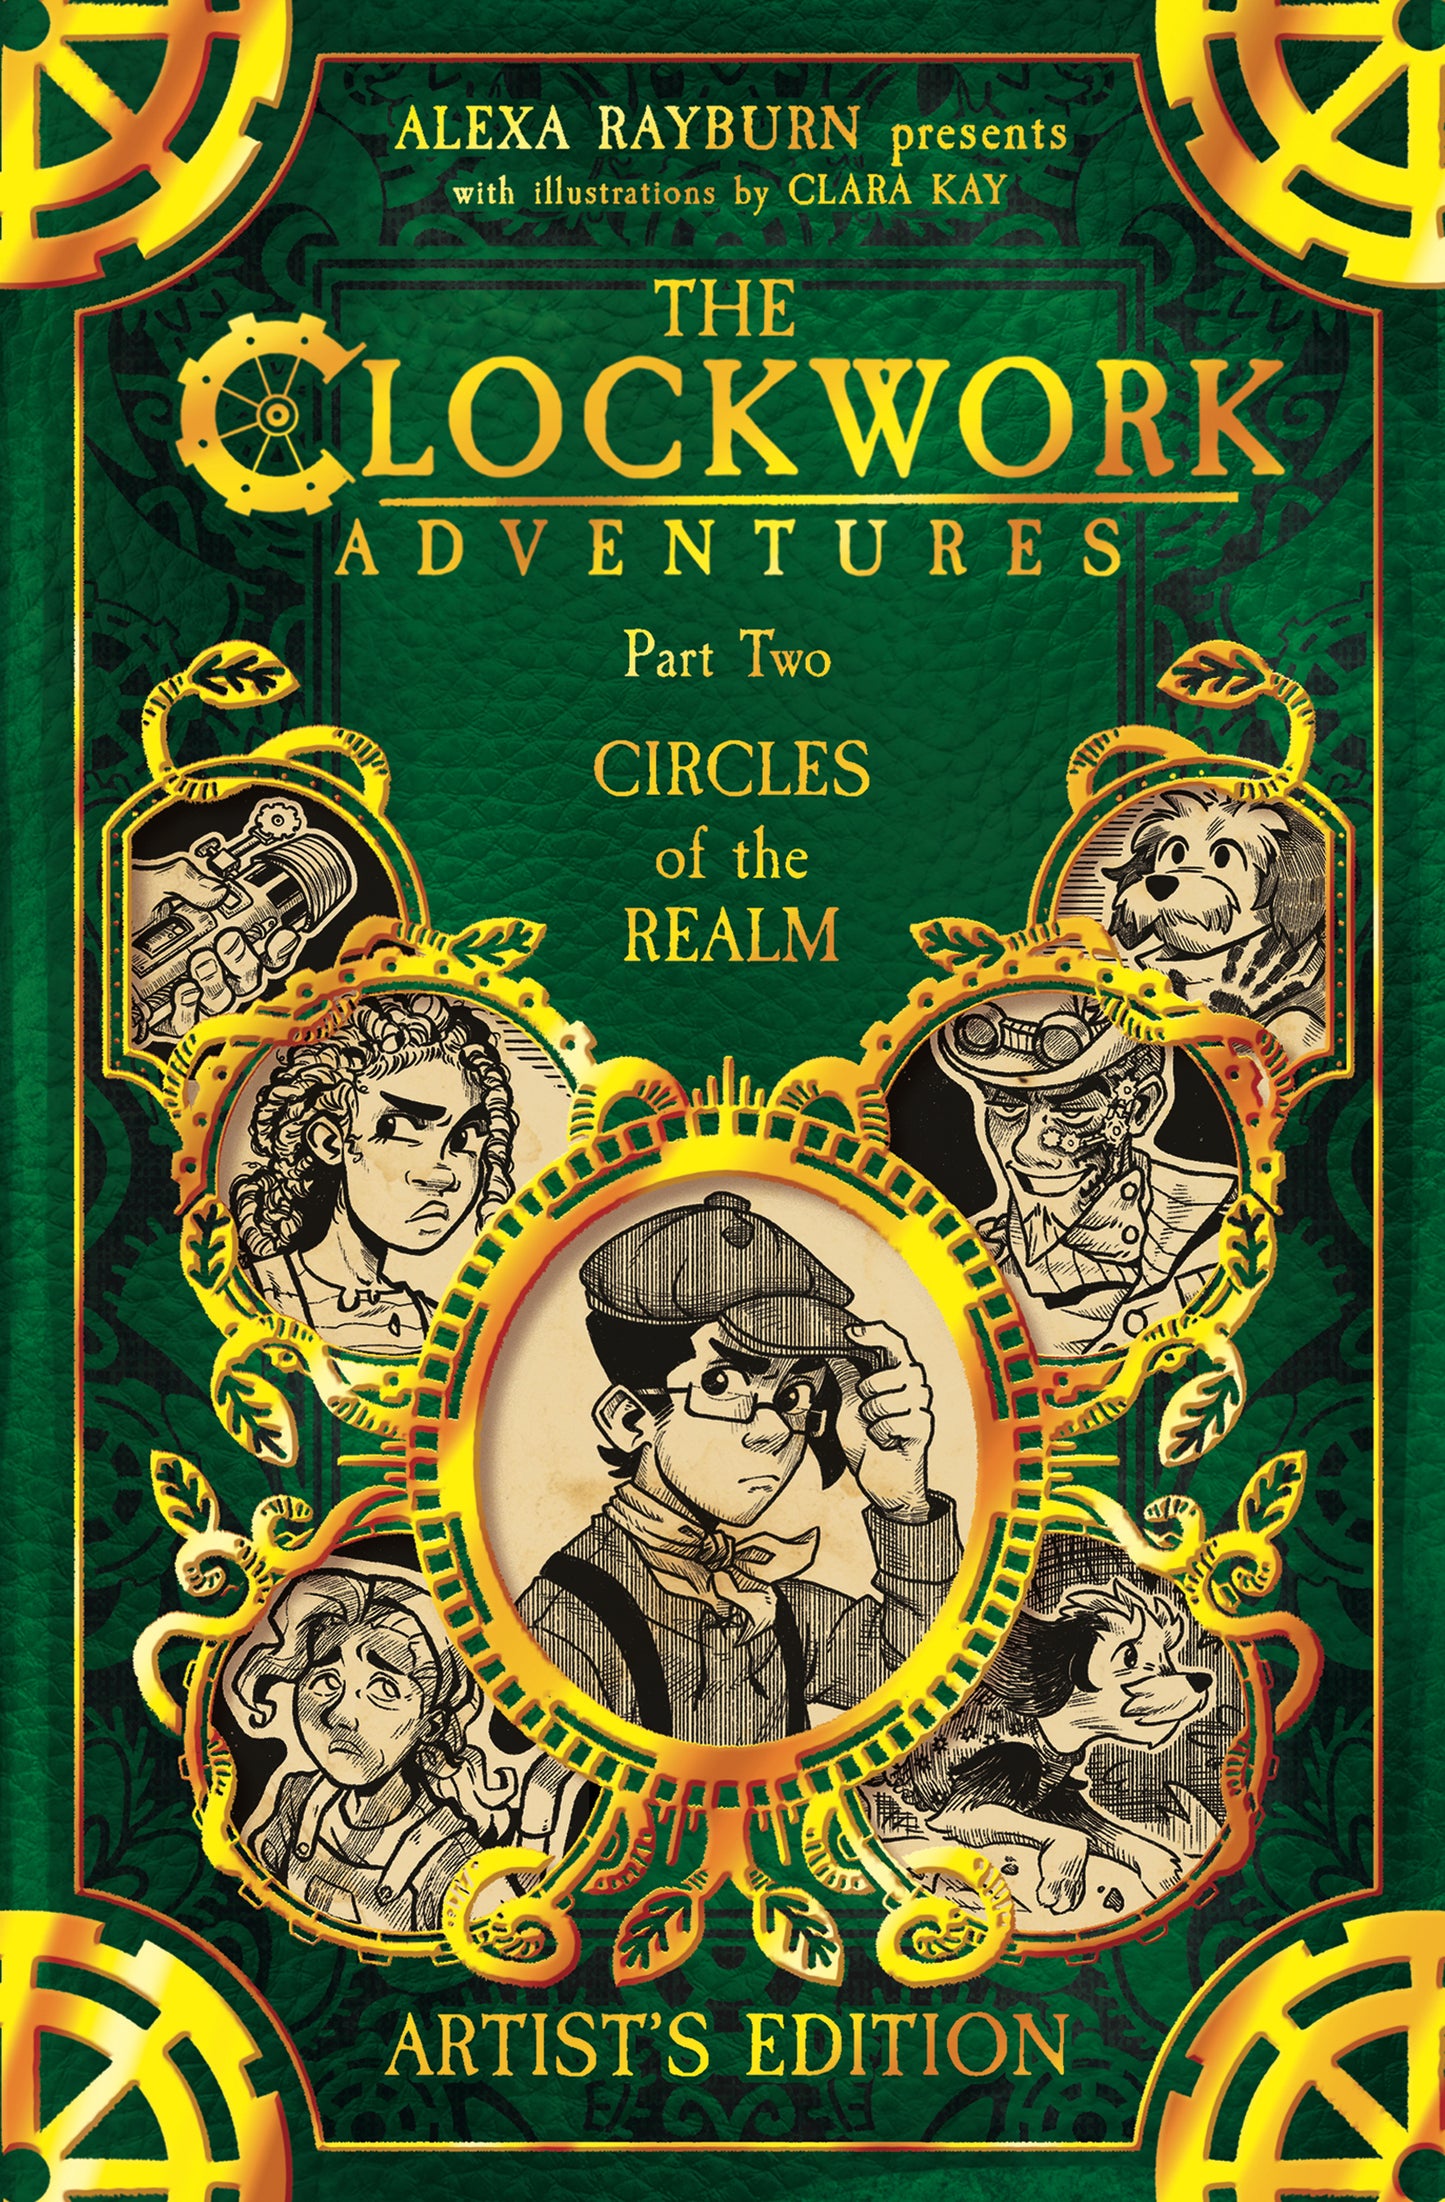 The Clockwork Adventures Part 2: Circles of the Realm - Artist's Edition